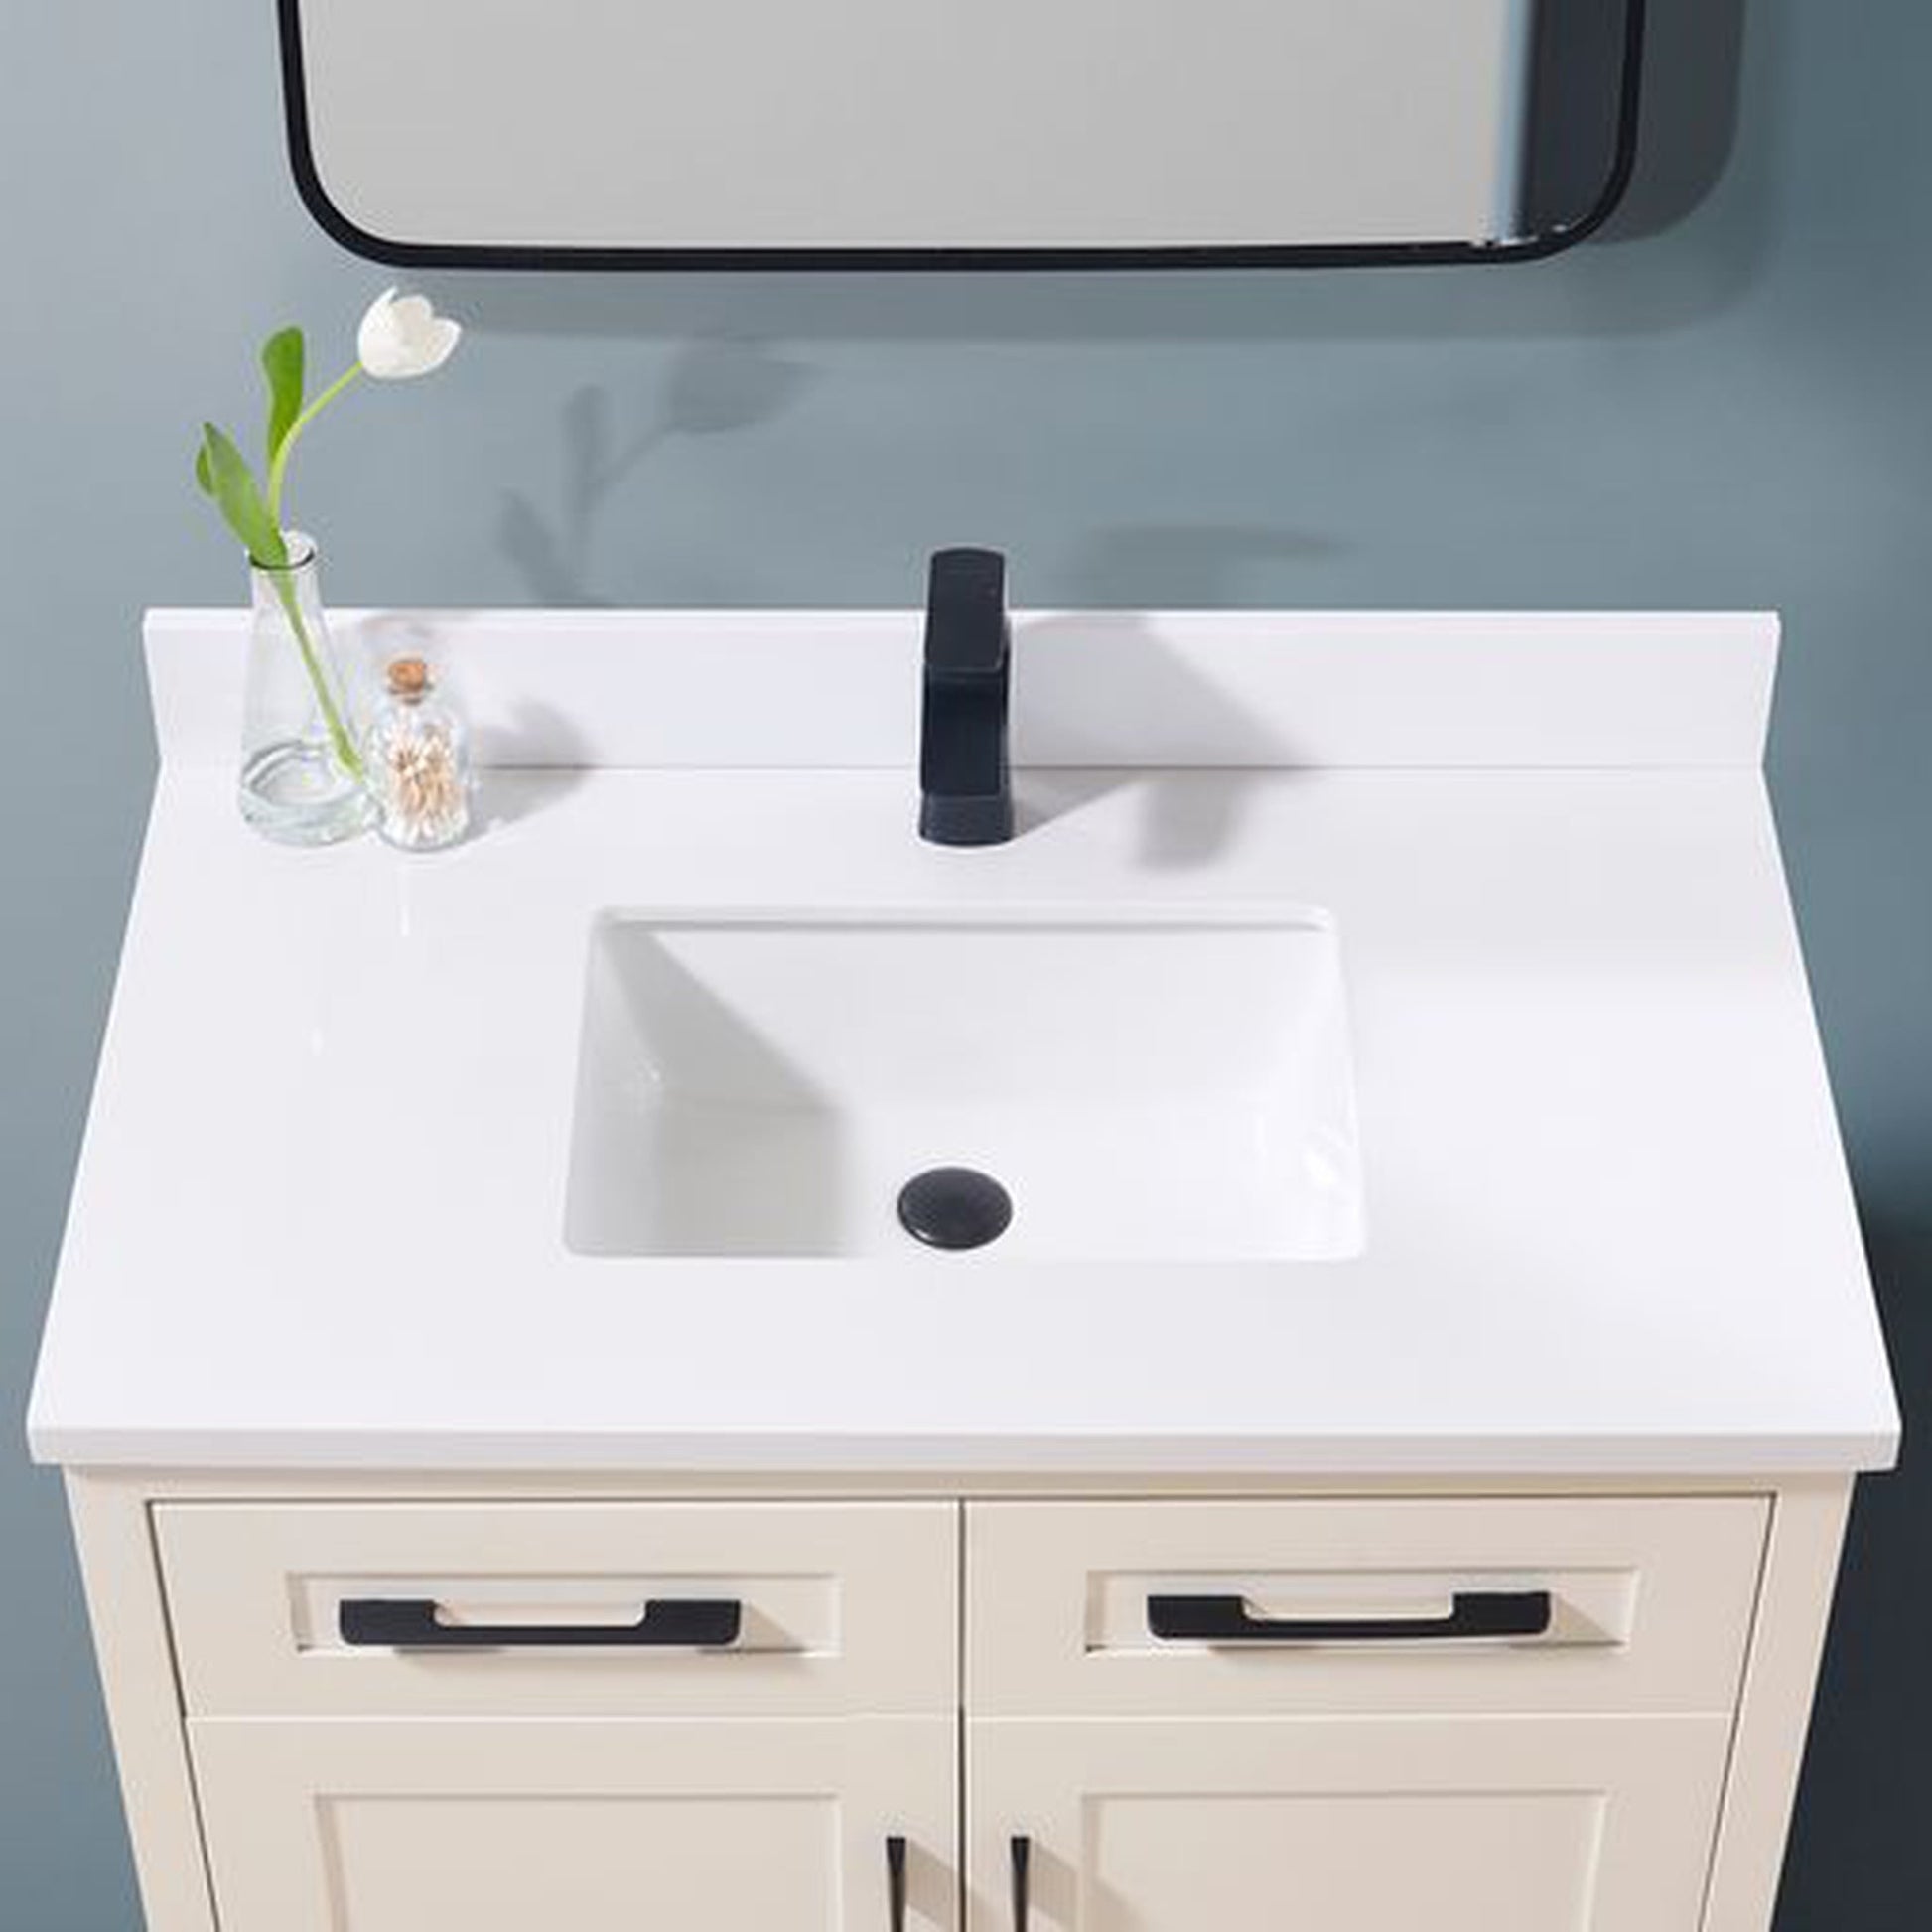 Altair Caorle 37" x 22" Snow White Composite Stone Bathroom Vanity Top With White SInk